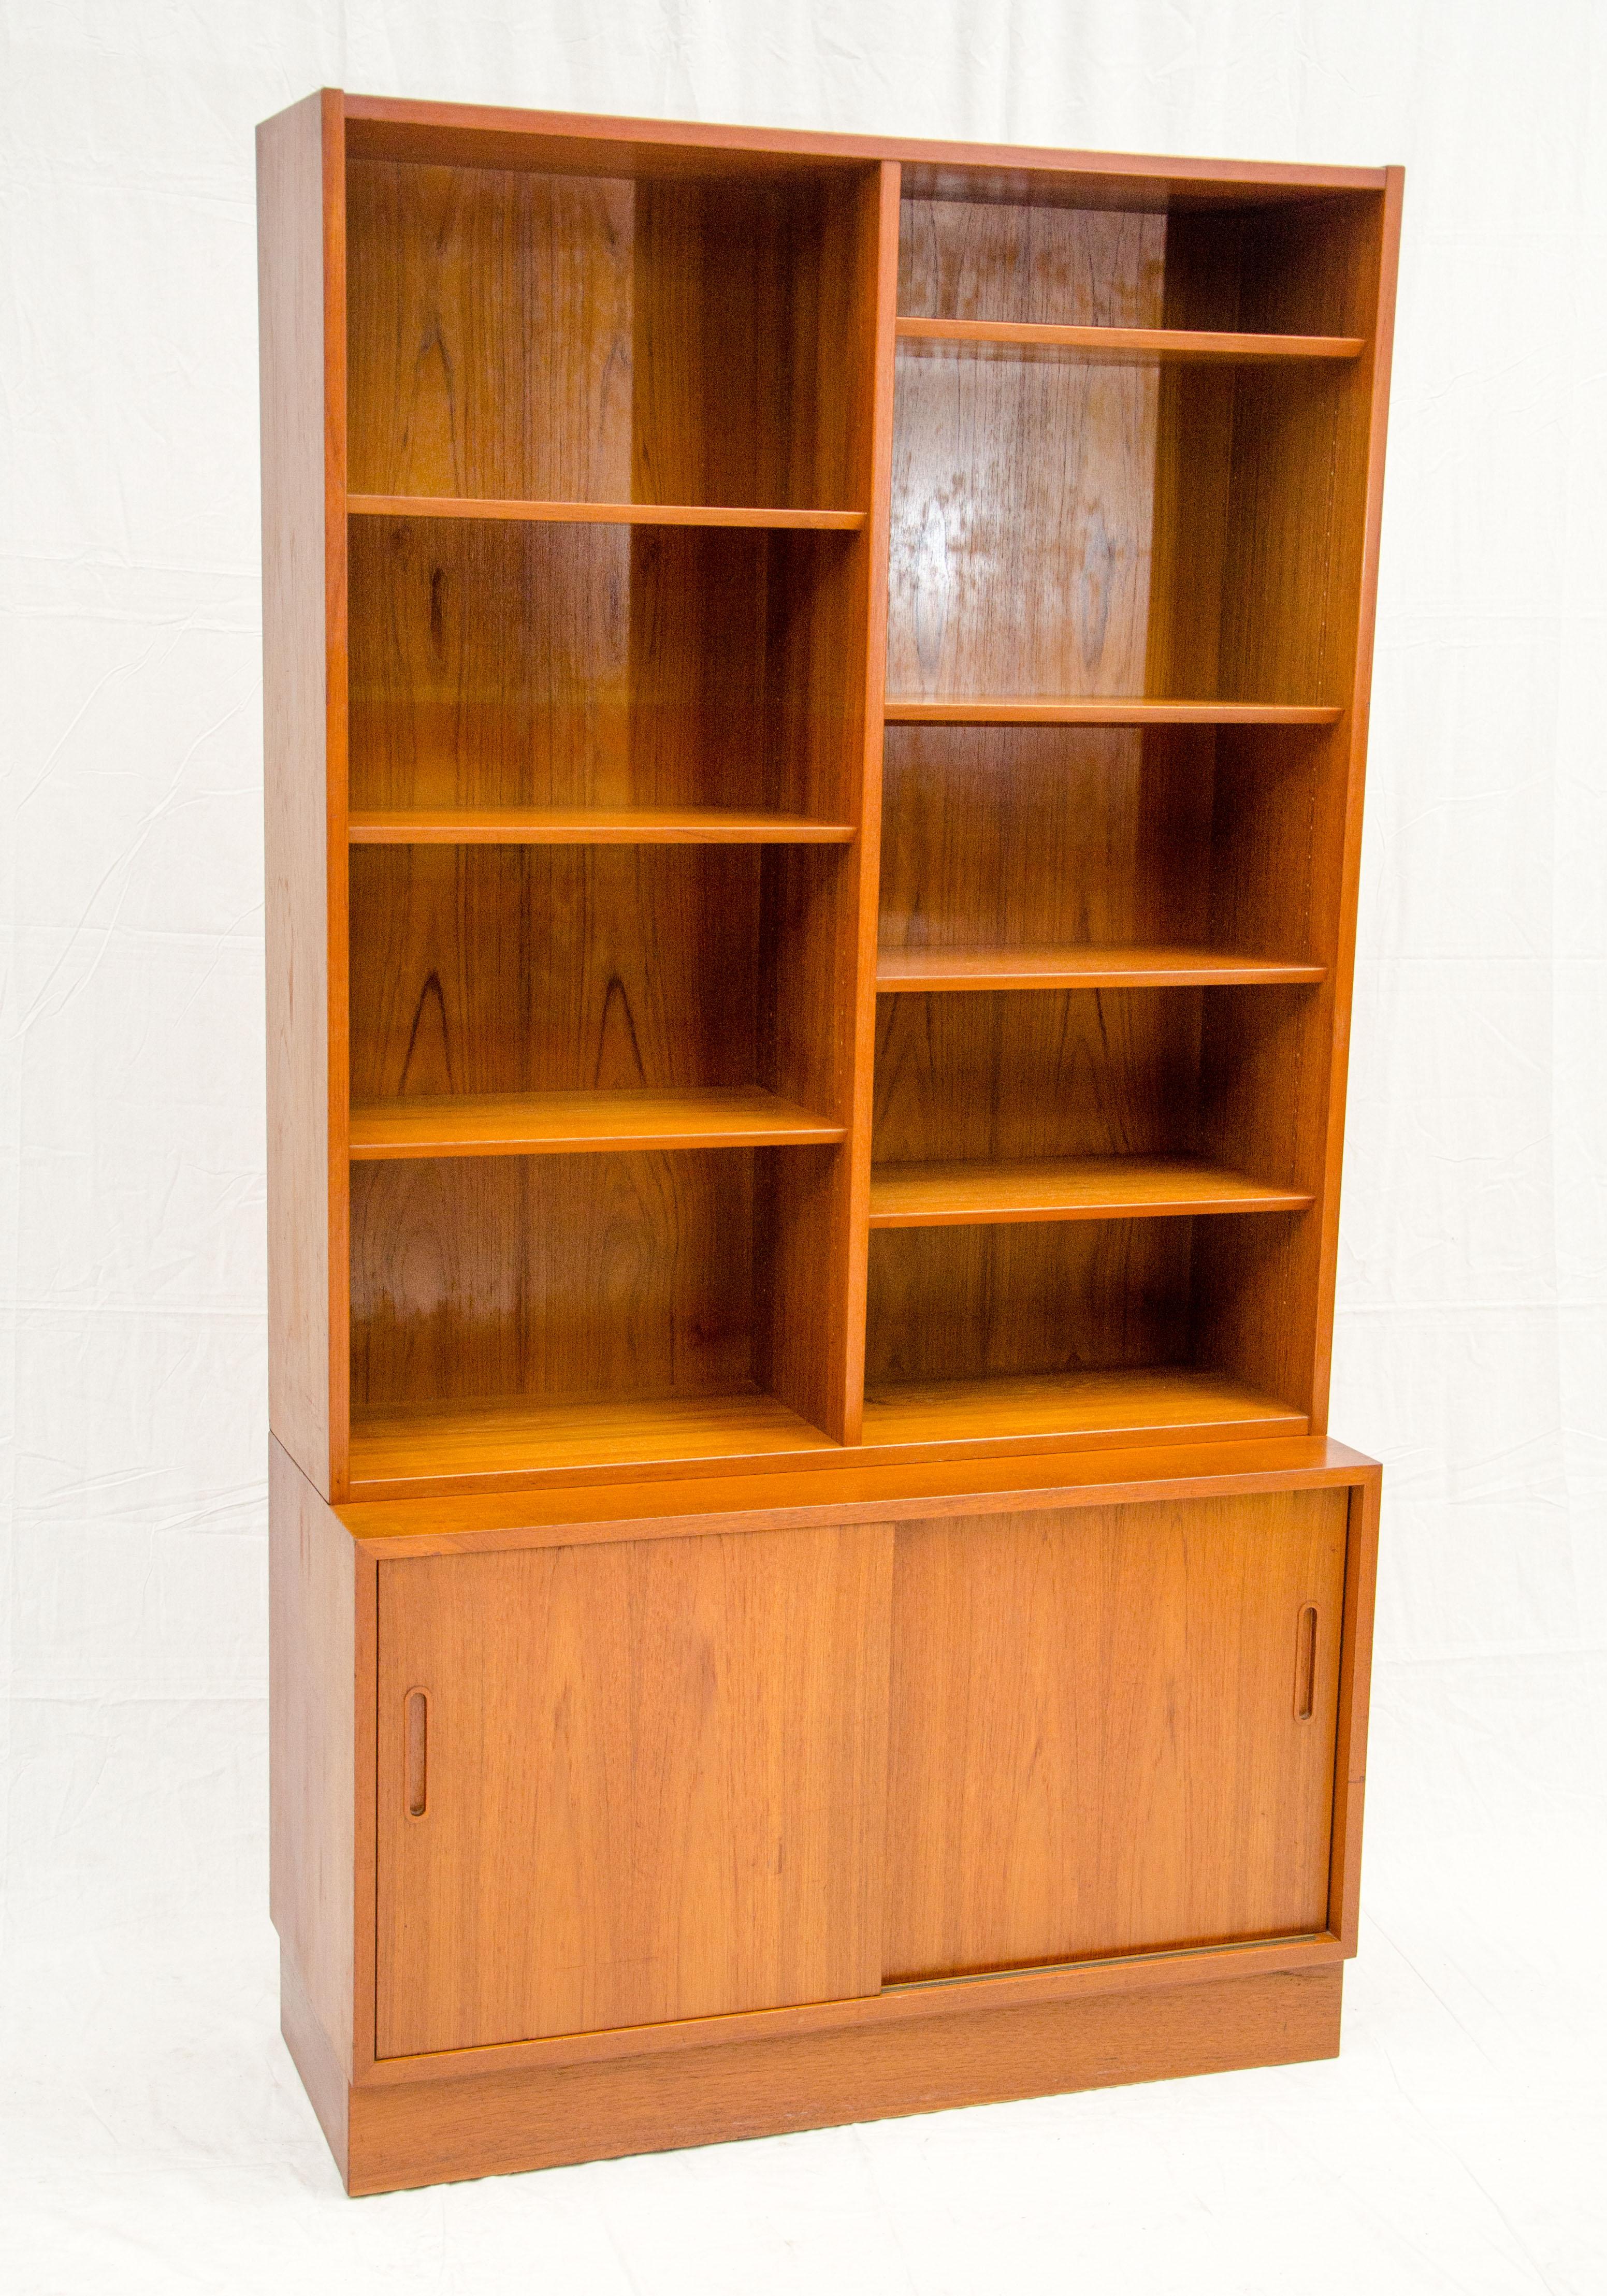 This very nice Danish teak bookcase has a storage cabinet under the shelving section. The storage cabinet has two sliding doors and a beech interior. There are three adjustable shelves as well as a small drawer that slides out. The storage base